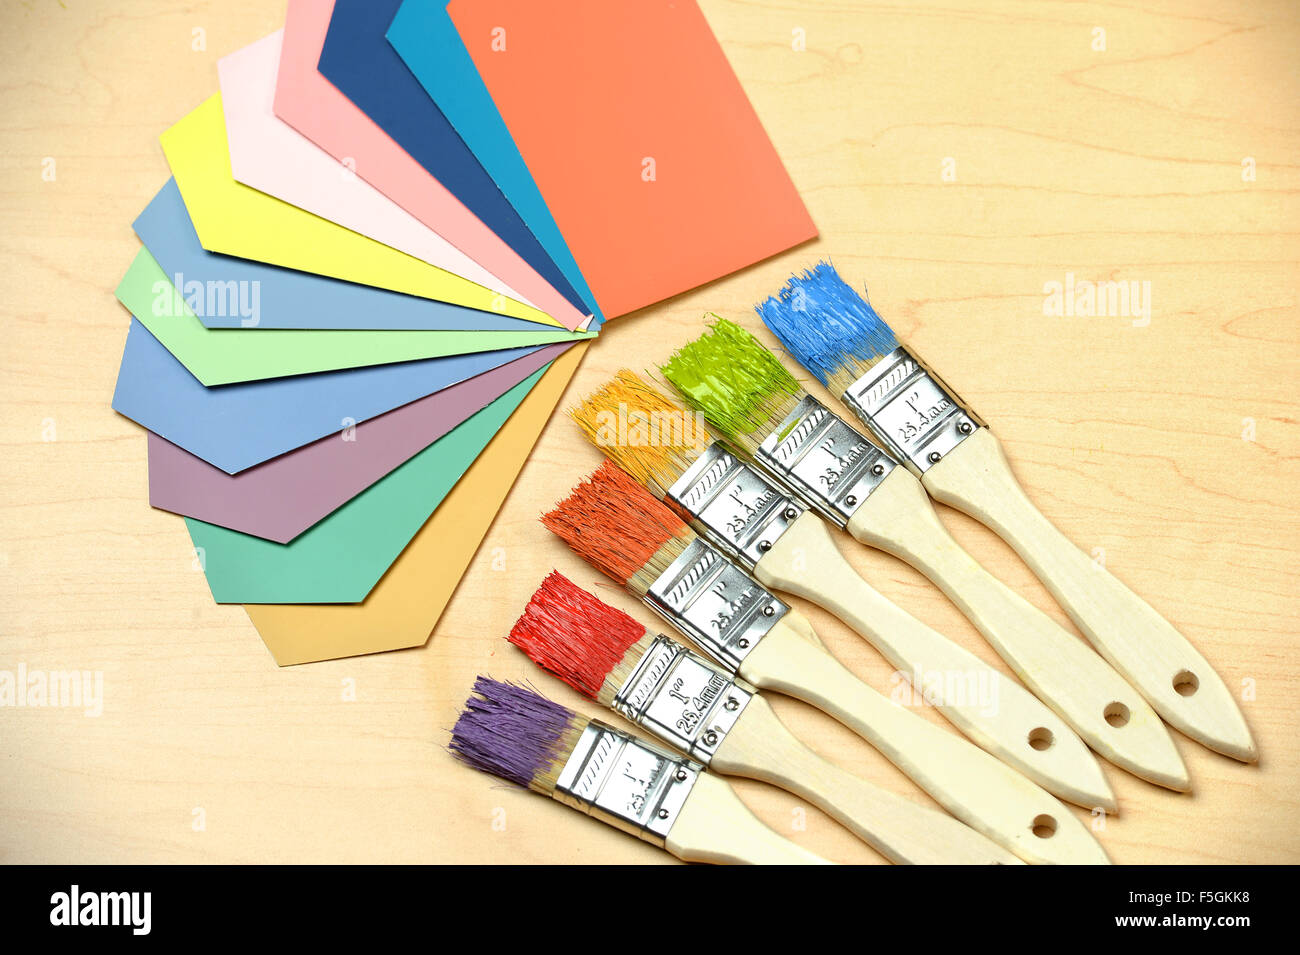 Assortment of color samples and paintbrushes over table Stock Photo